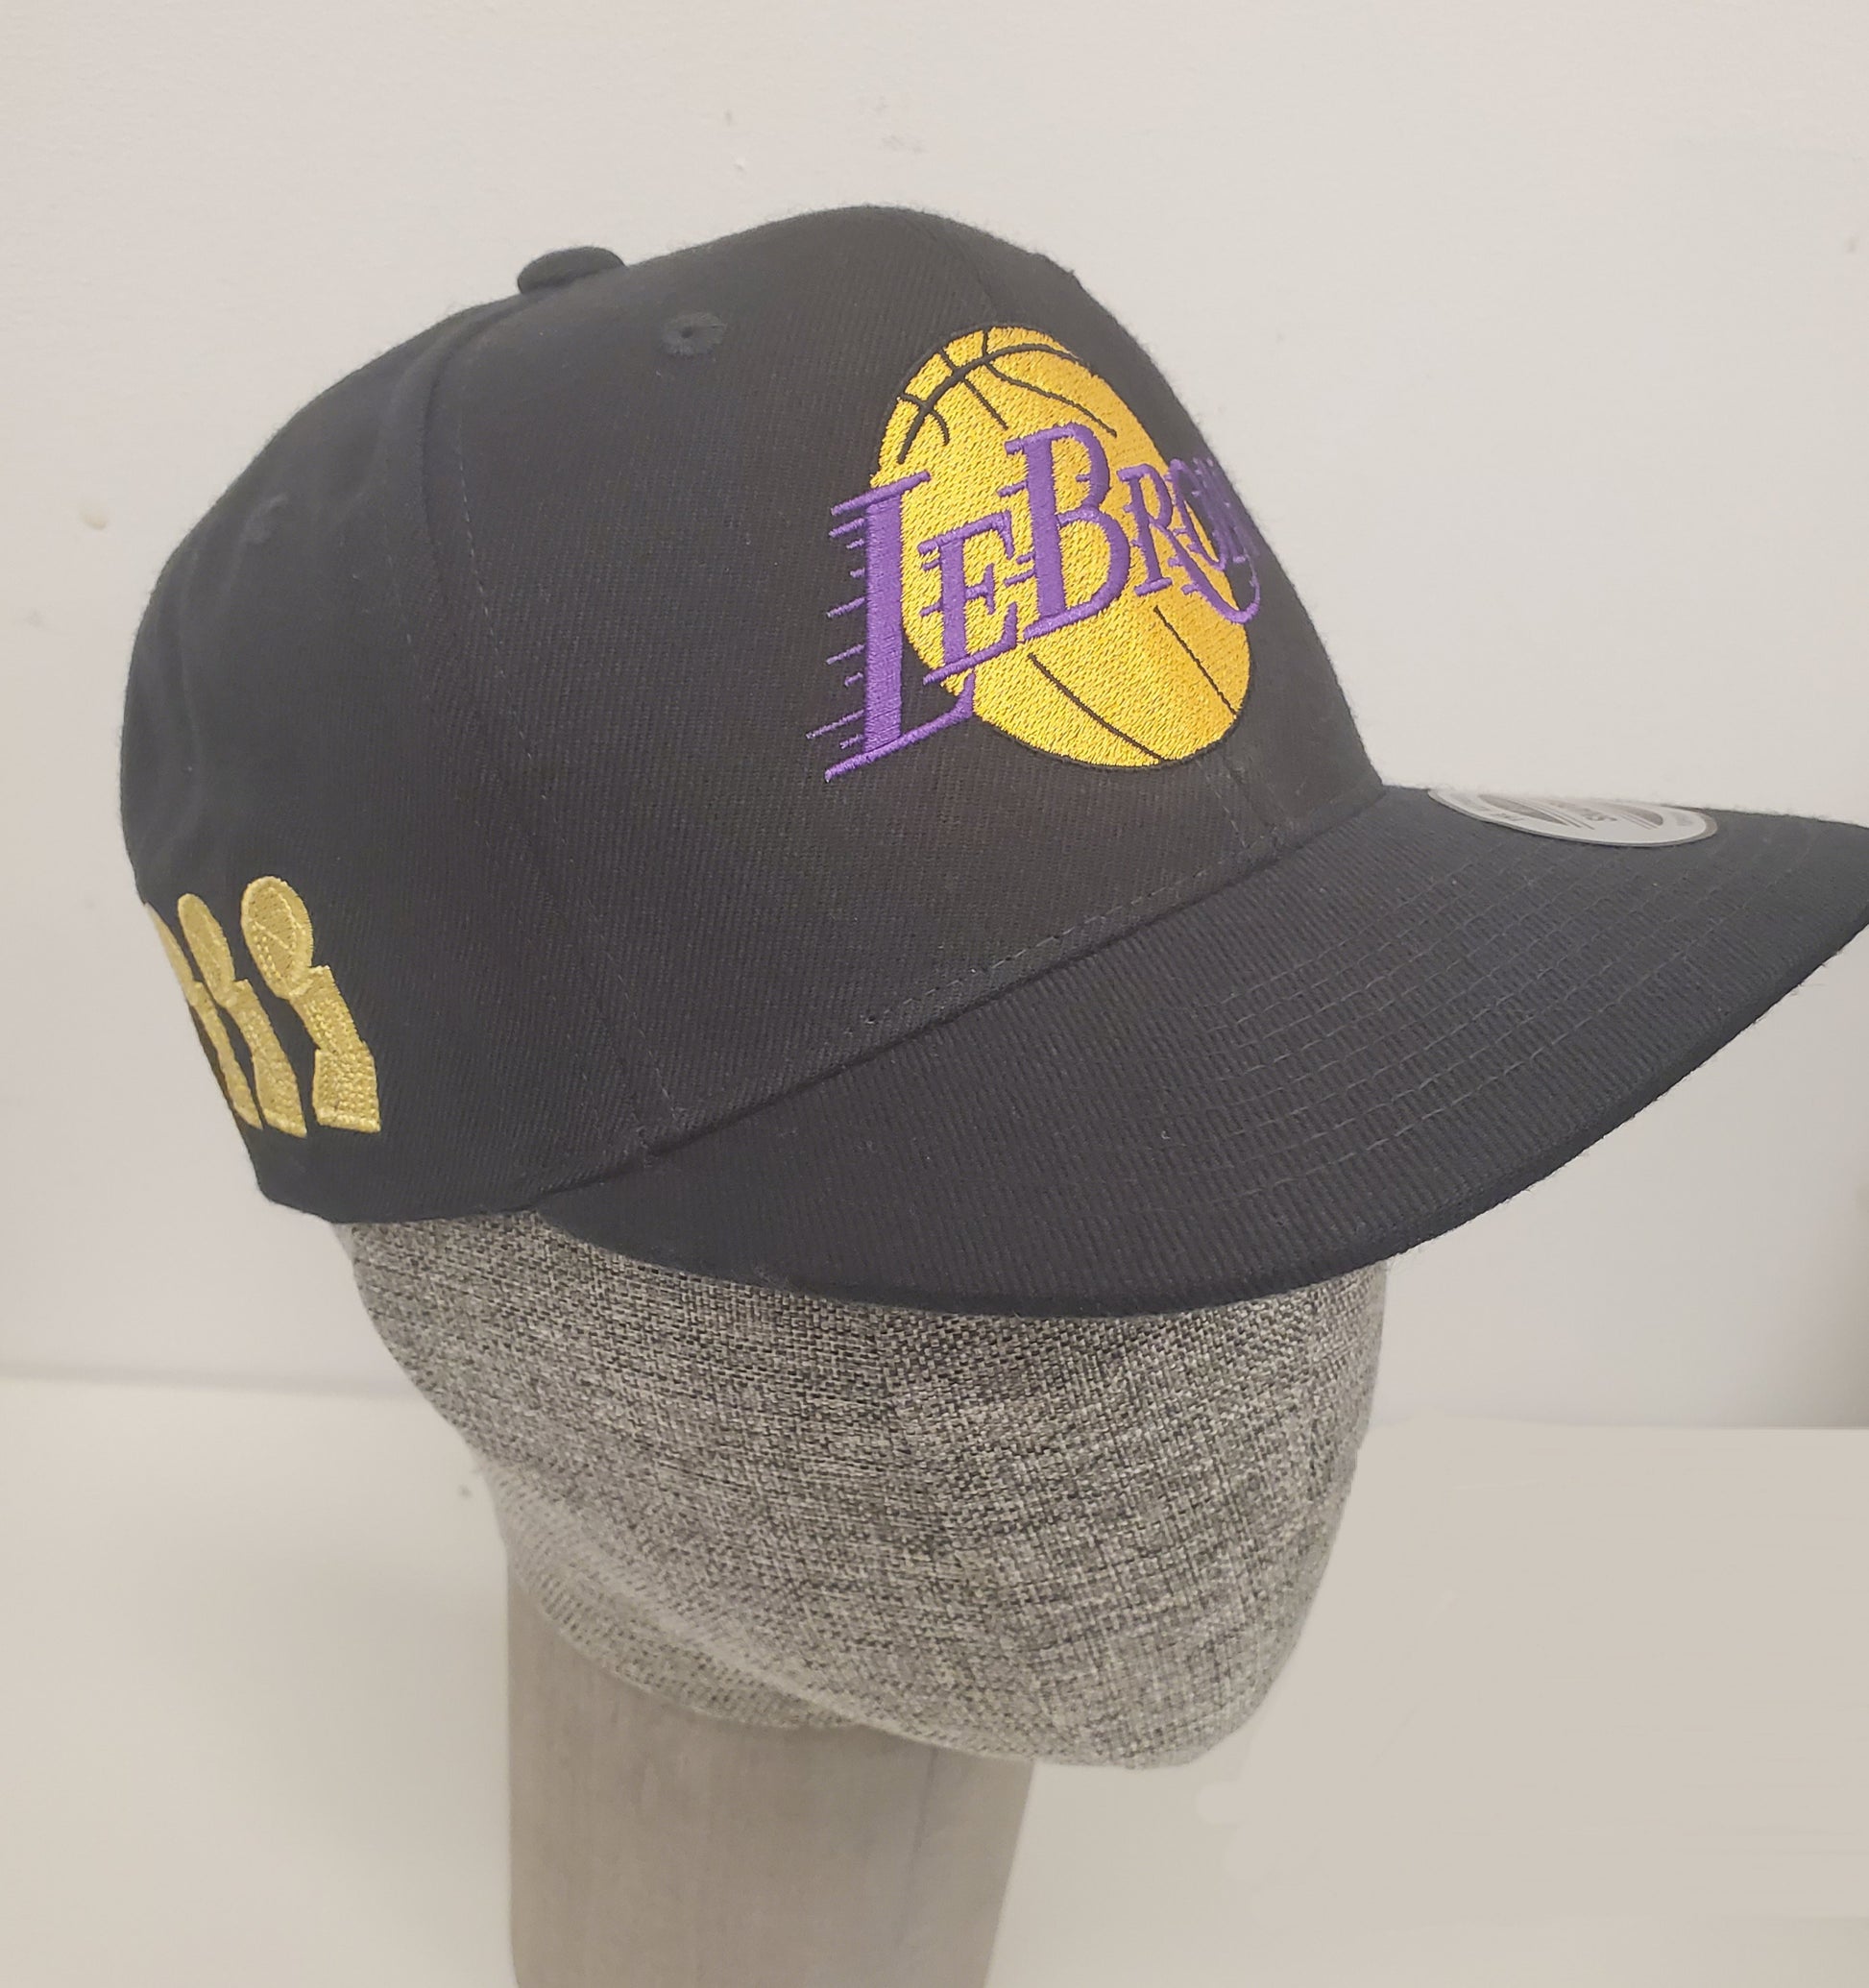 LeBron James Lakers apparel guide: How to rep the king in style